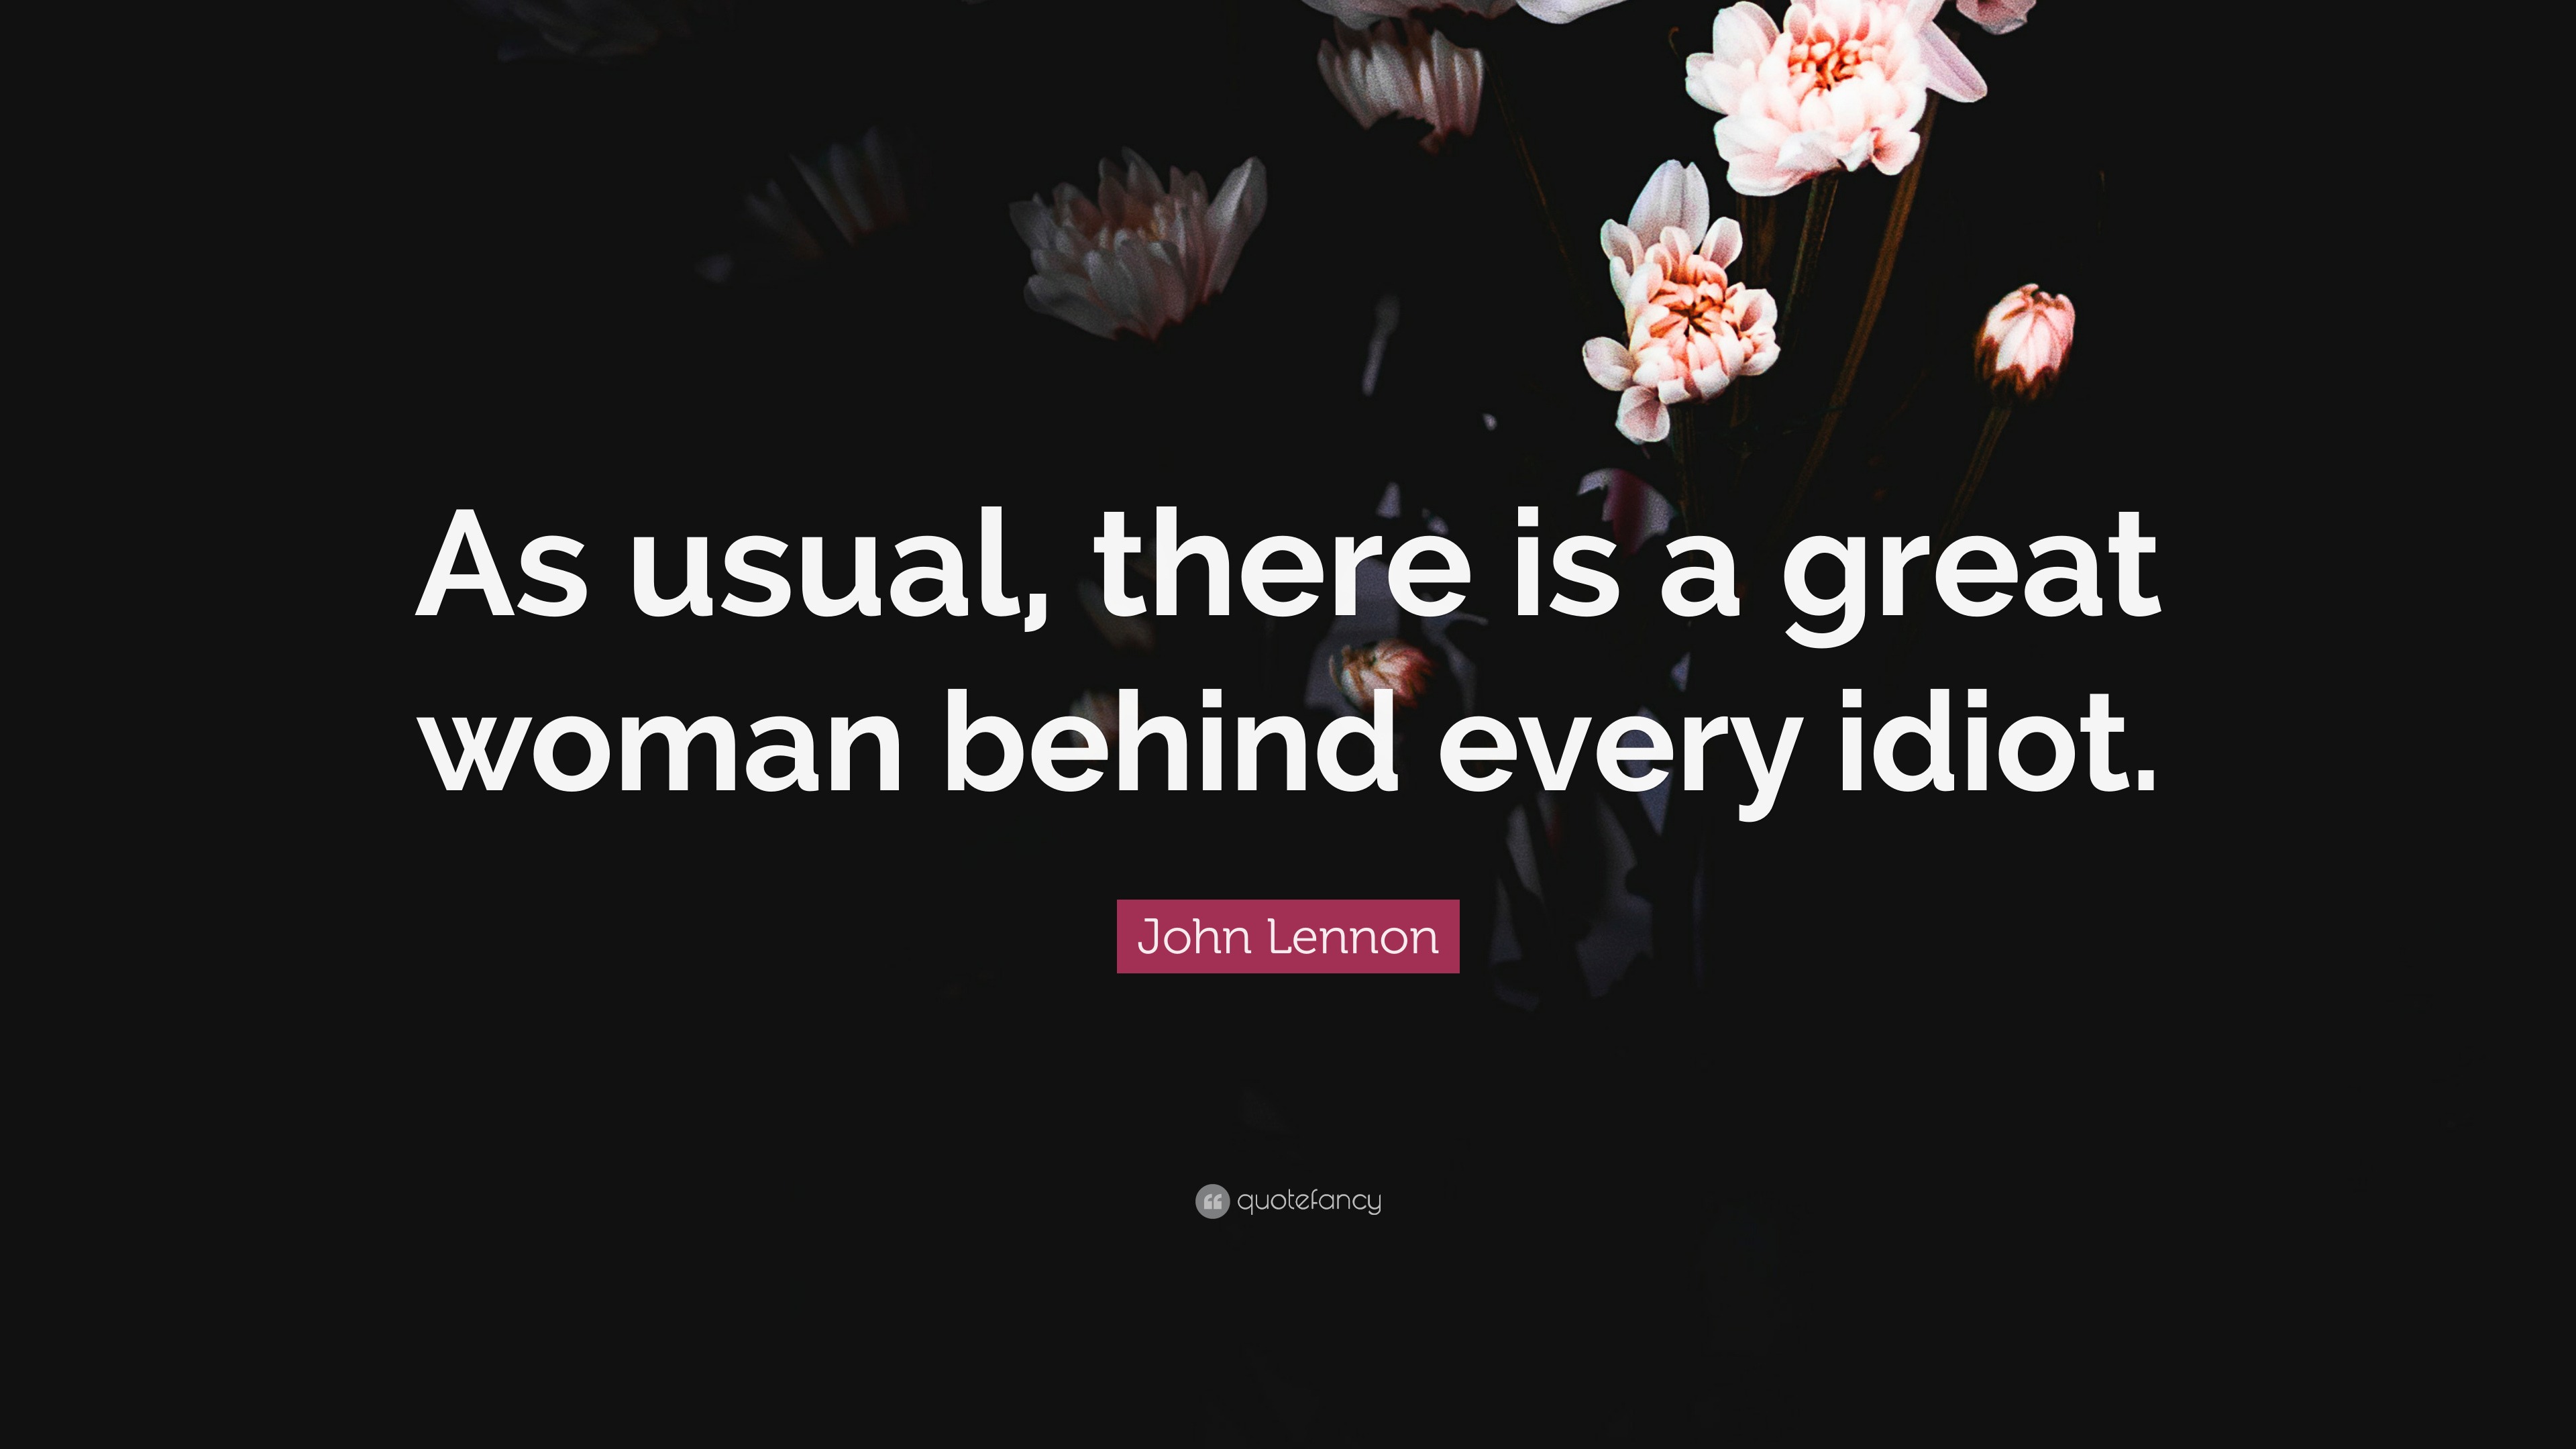 John Lennon quote: Women  I mean, they are the other half